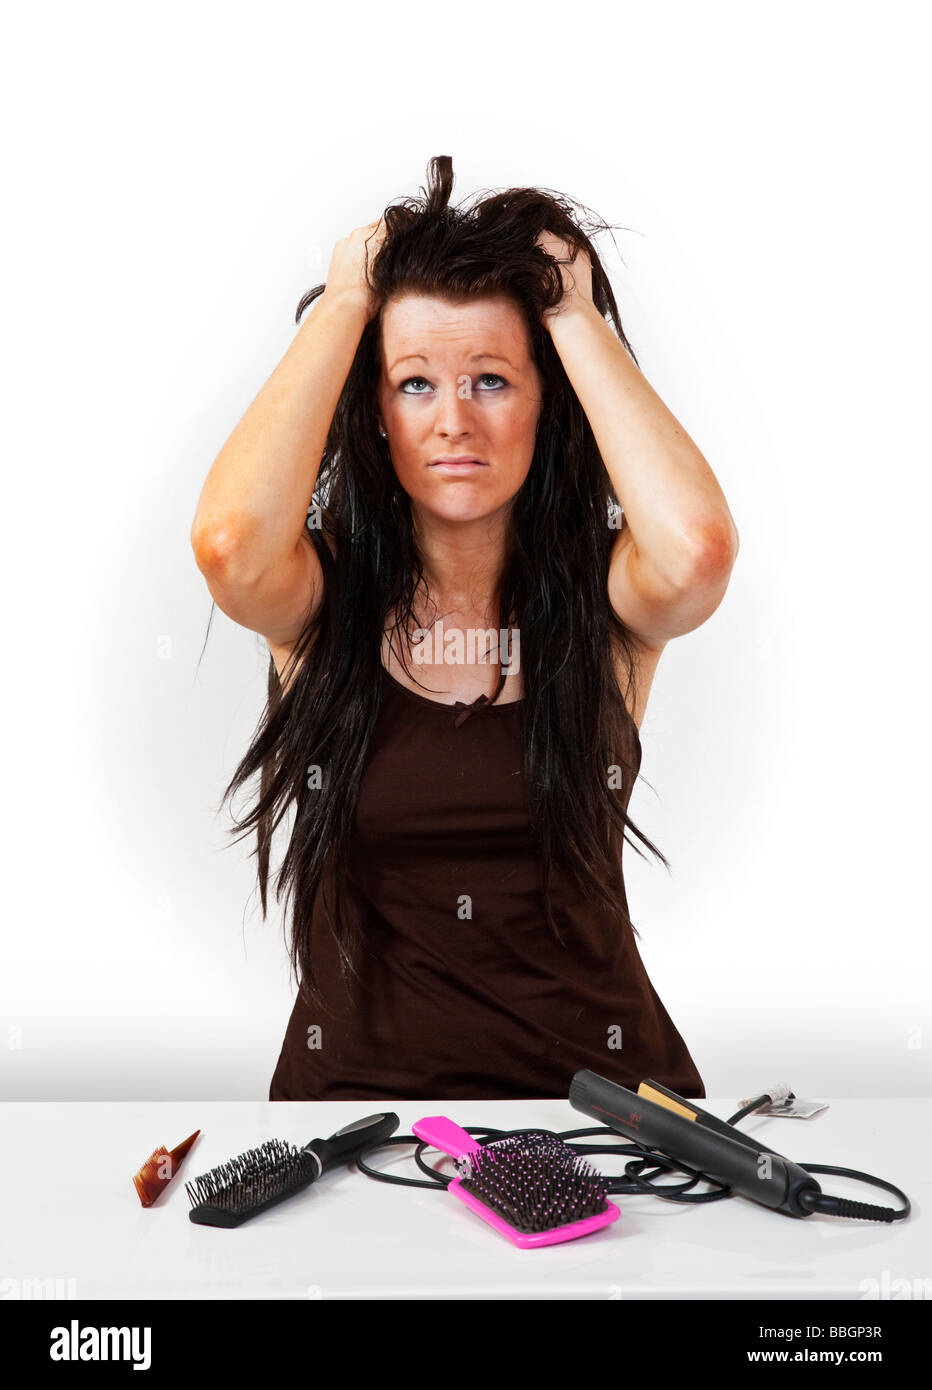 Attractive model having a bad hair day. Stock Photo